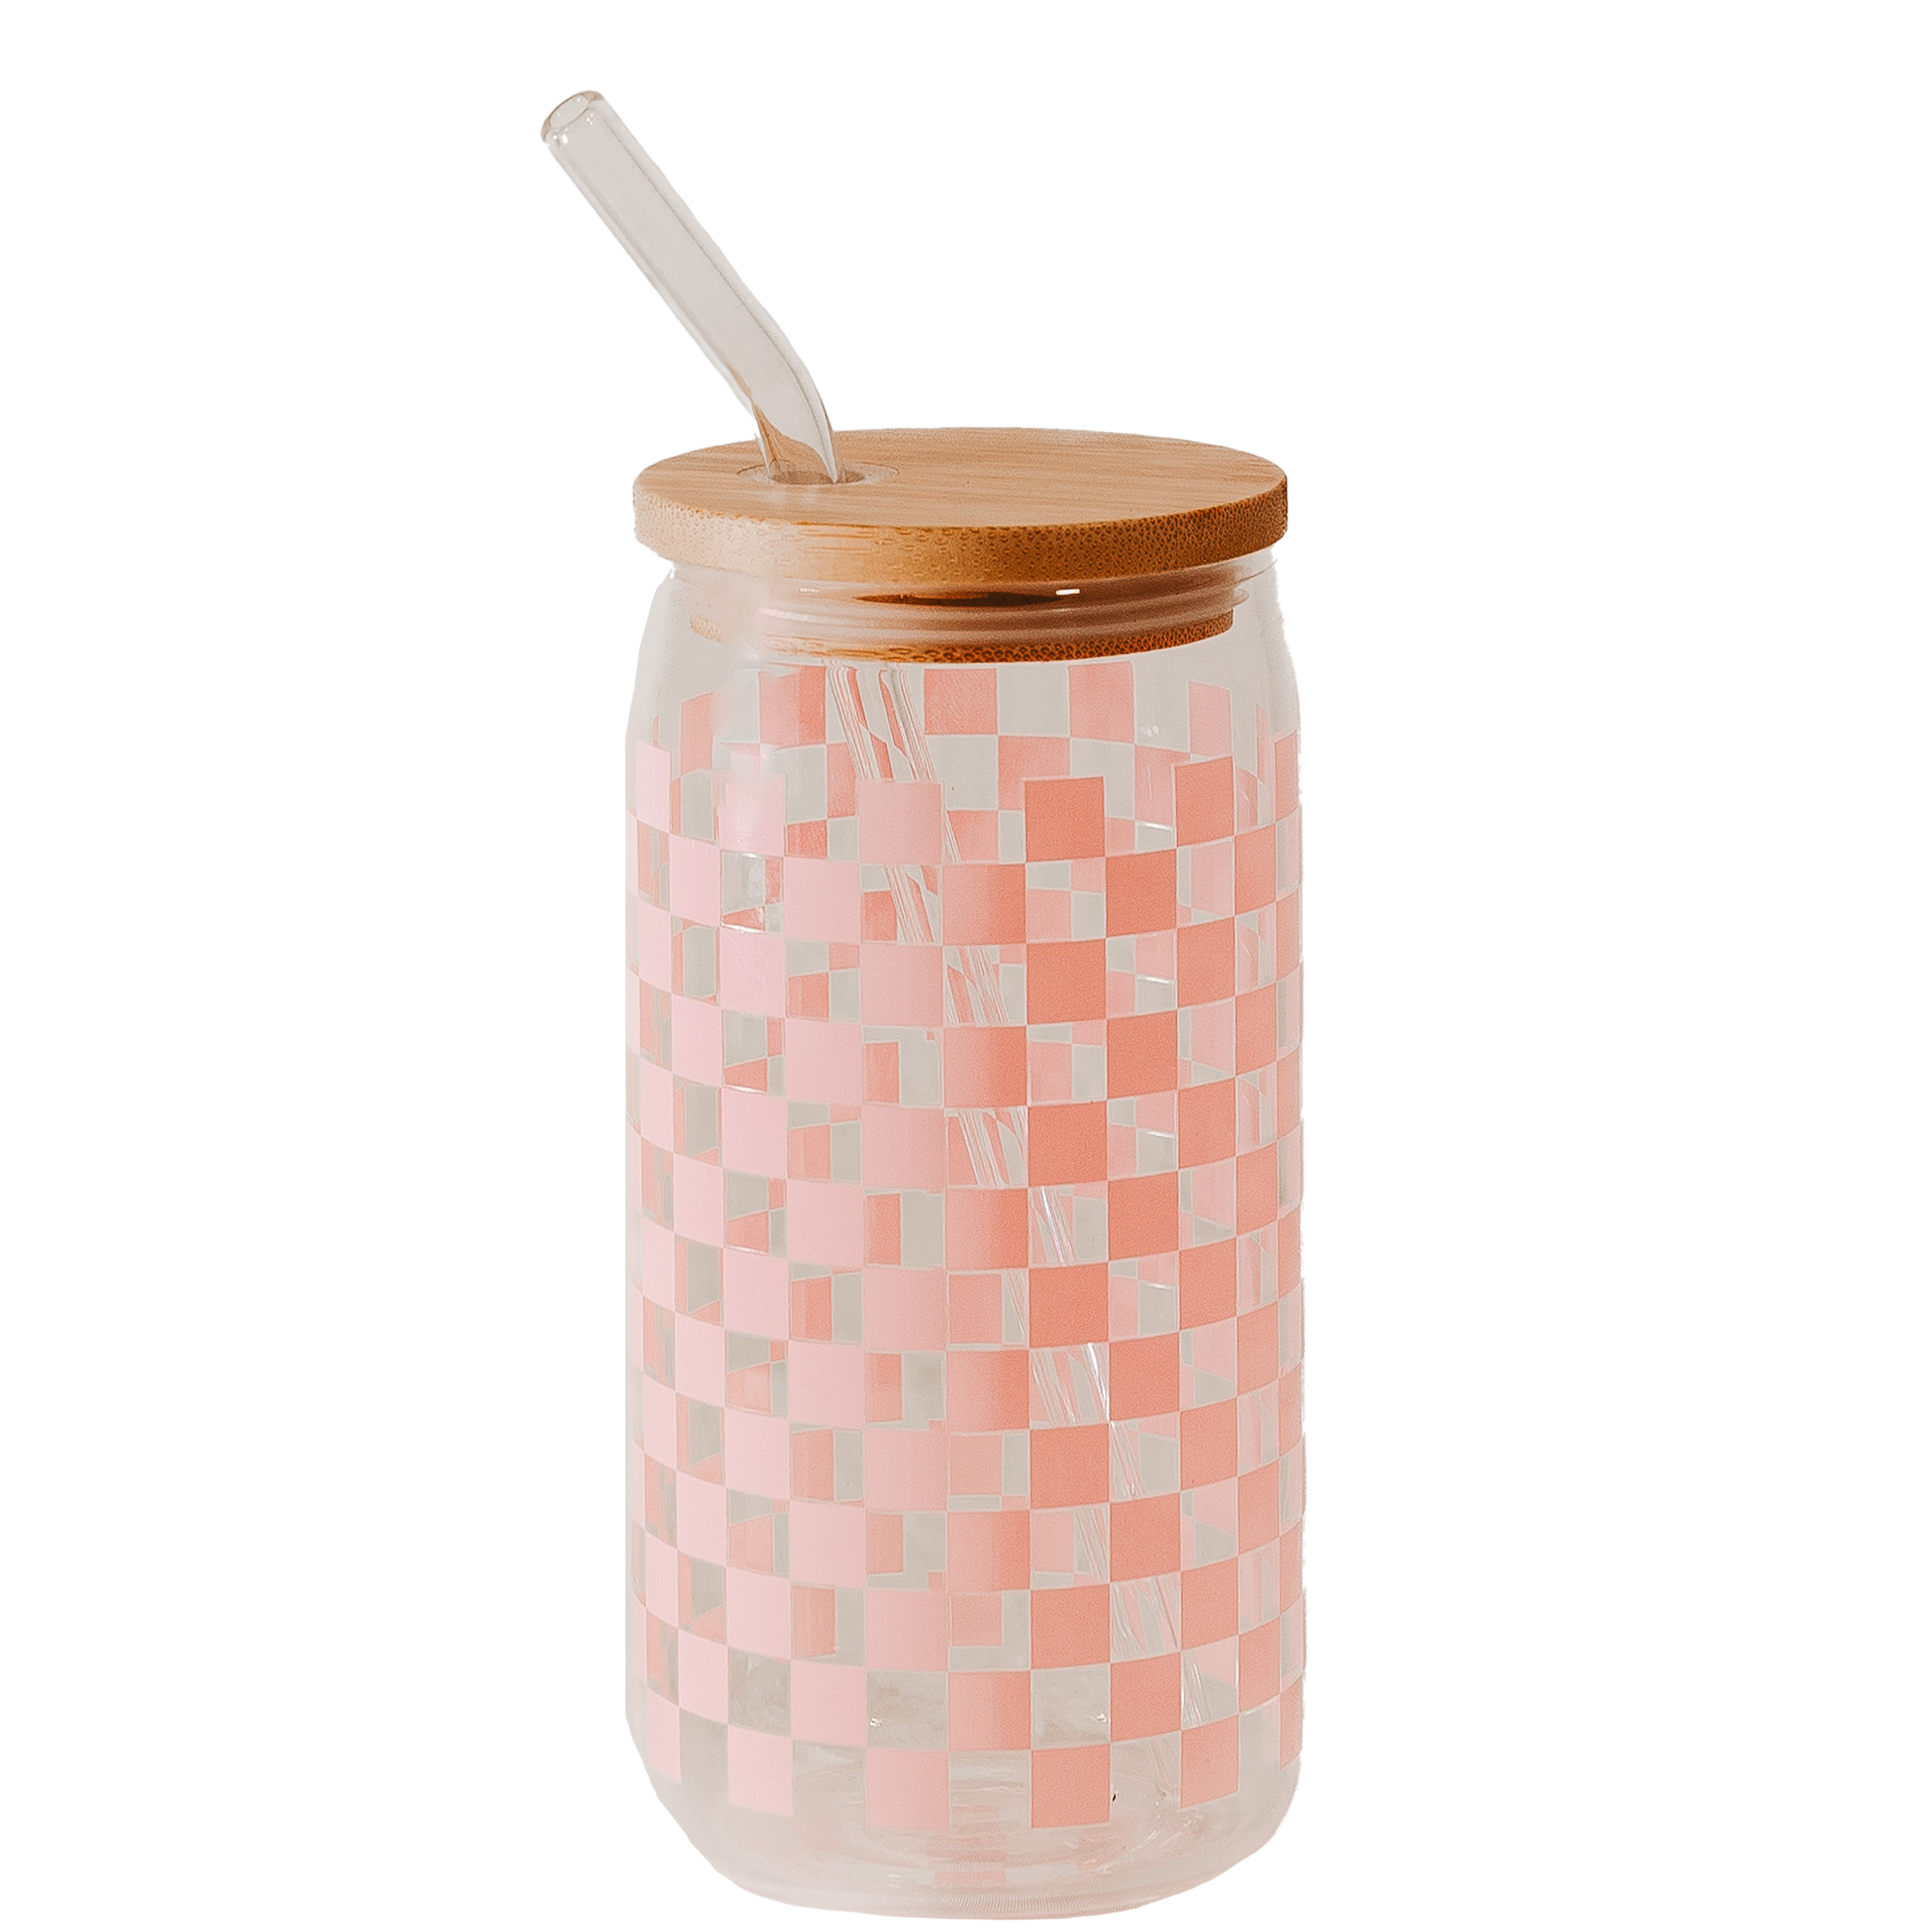 Pink Checkered Can Glass - 17 oz